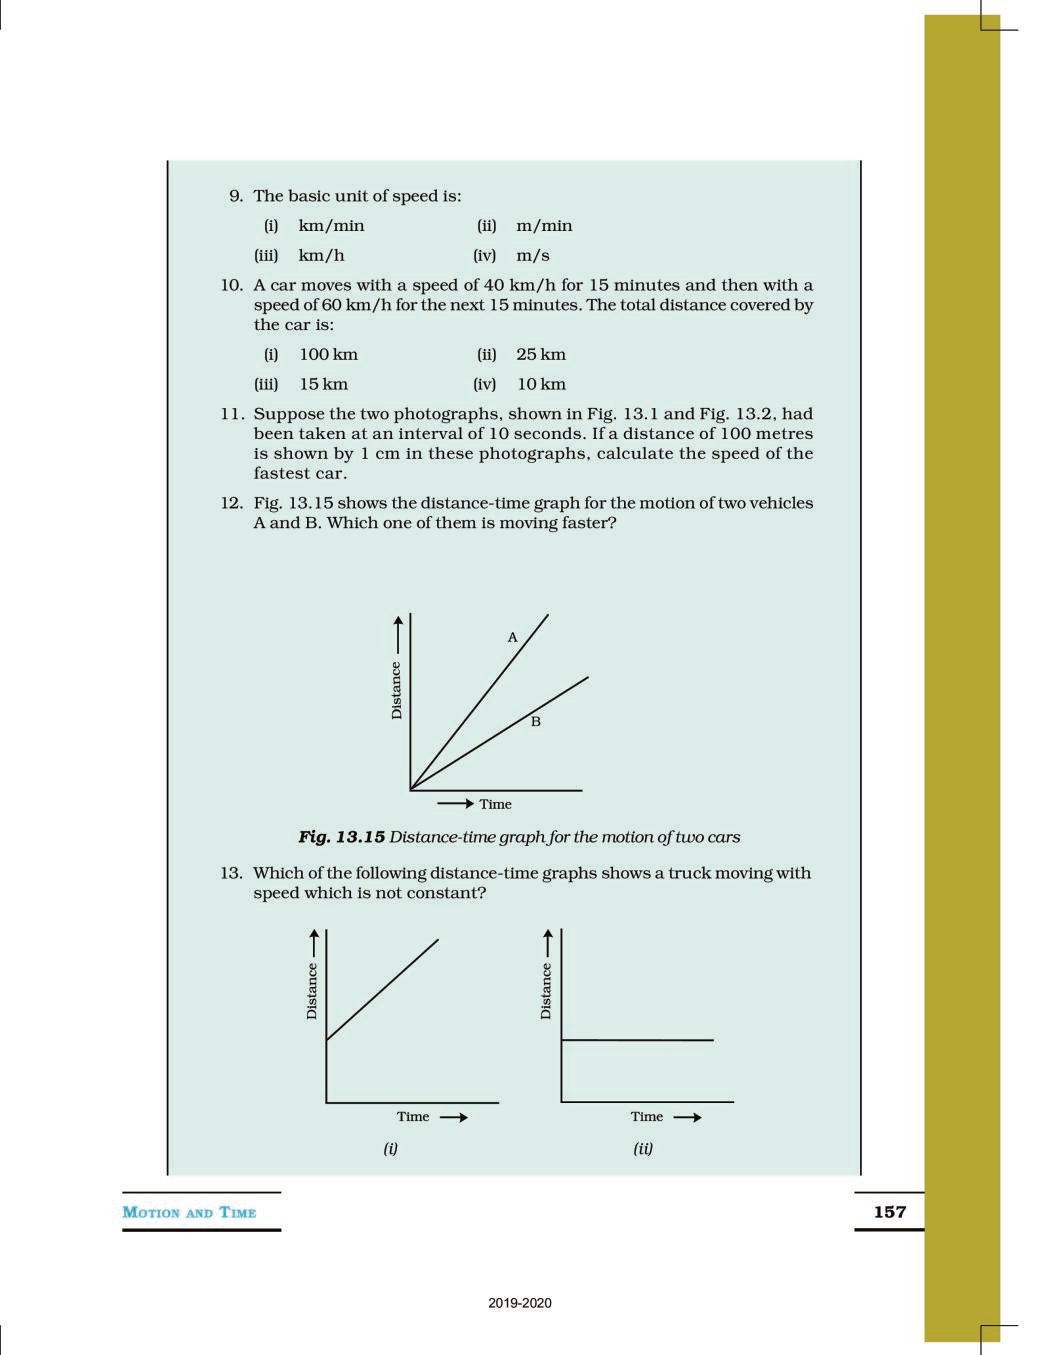 case study questions for class 7 science chapter 13